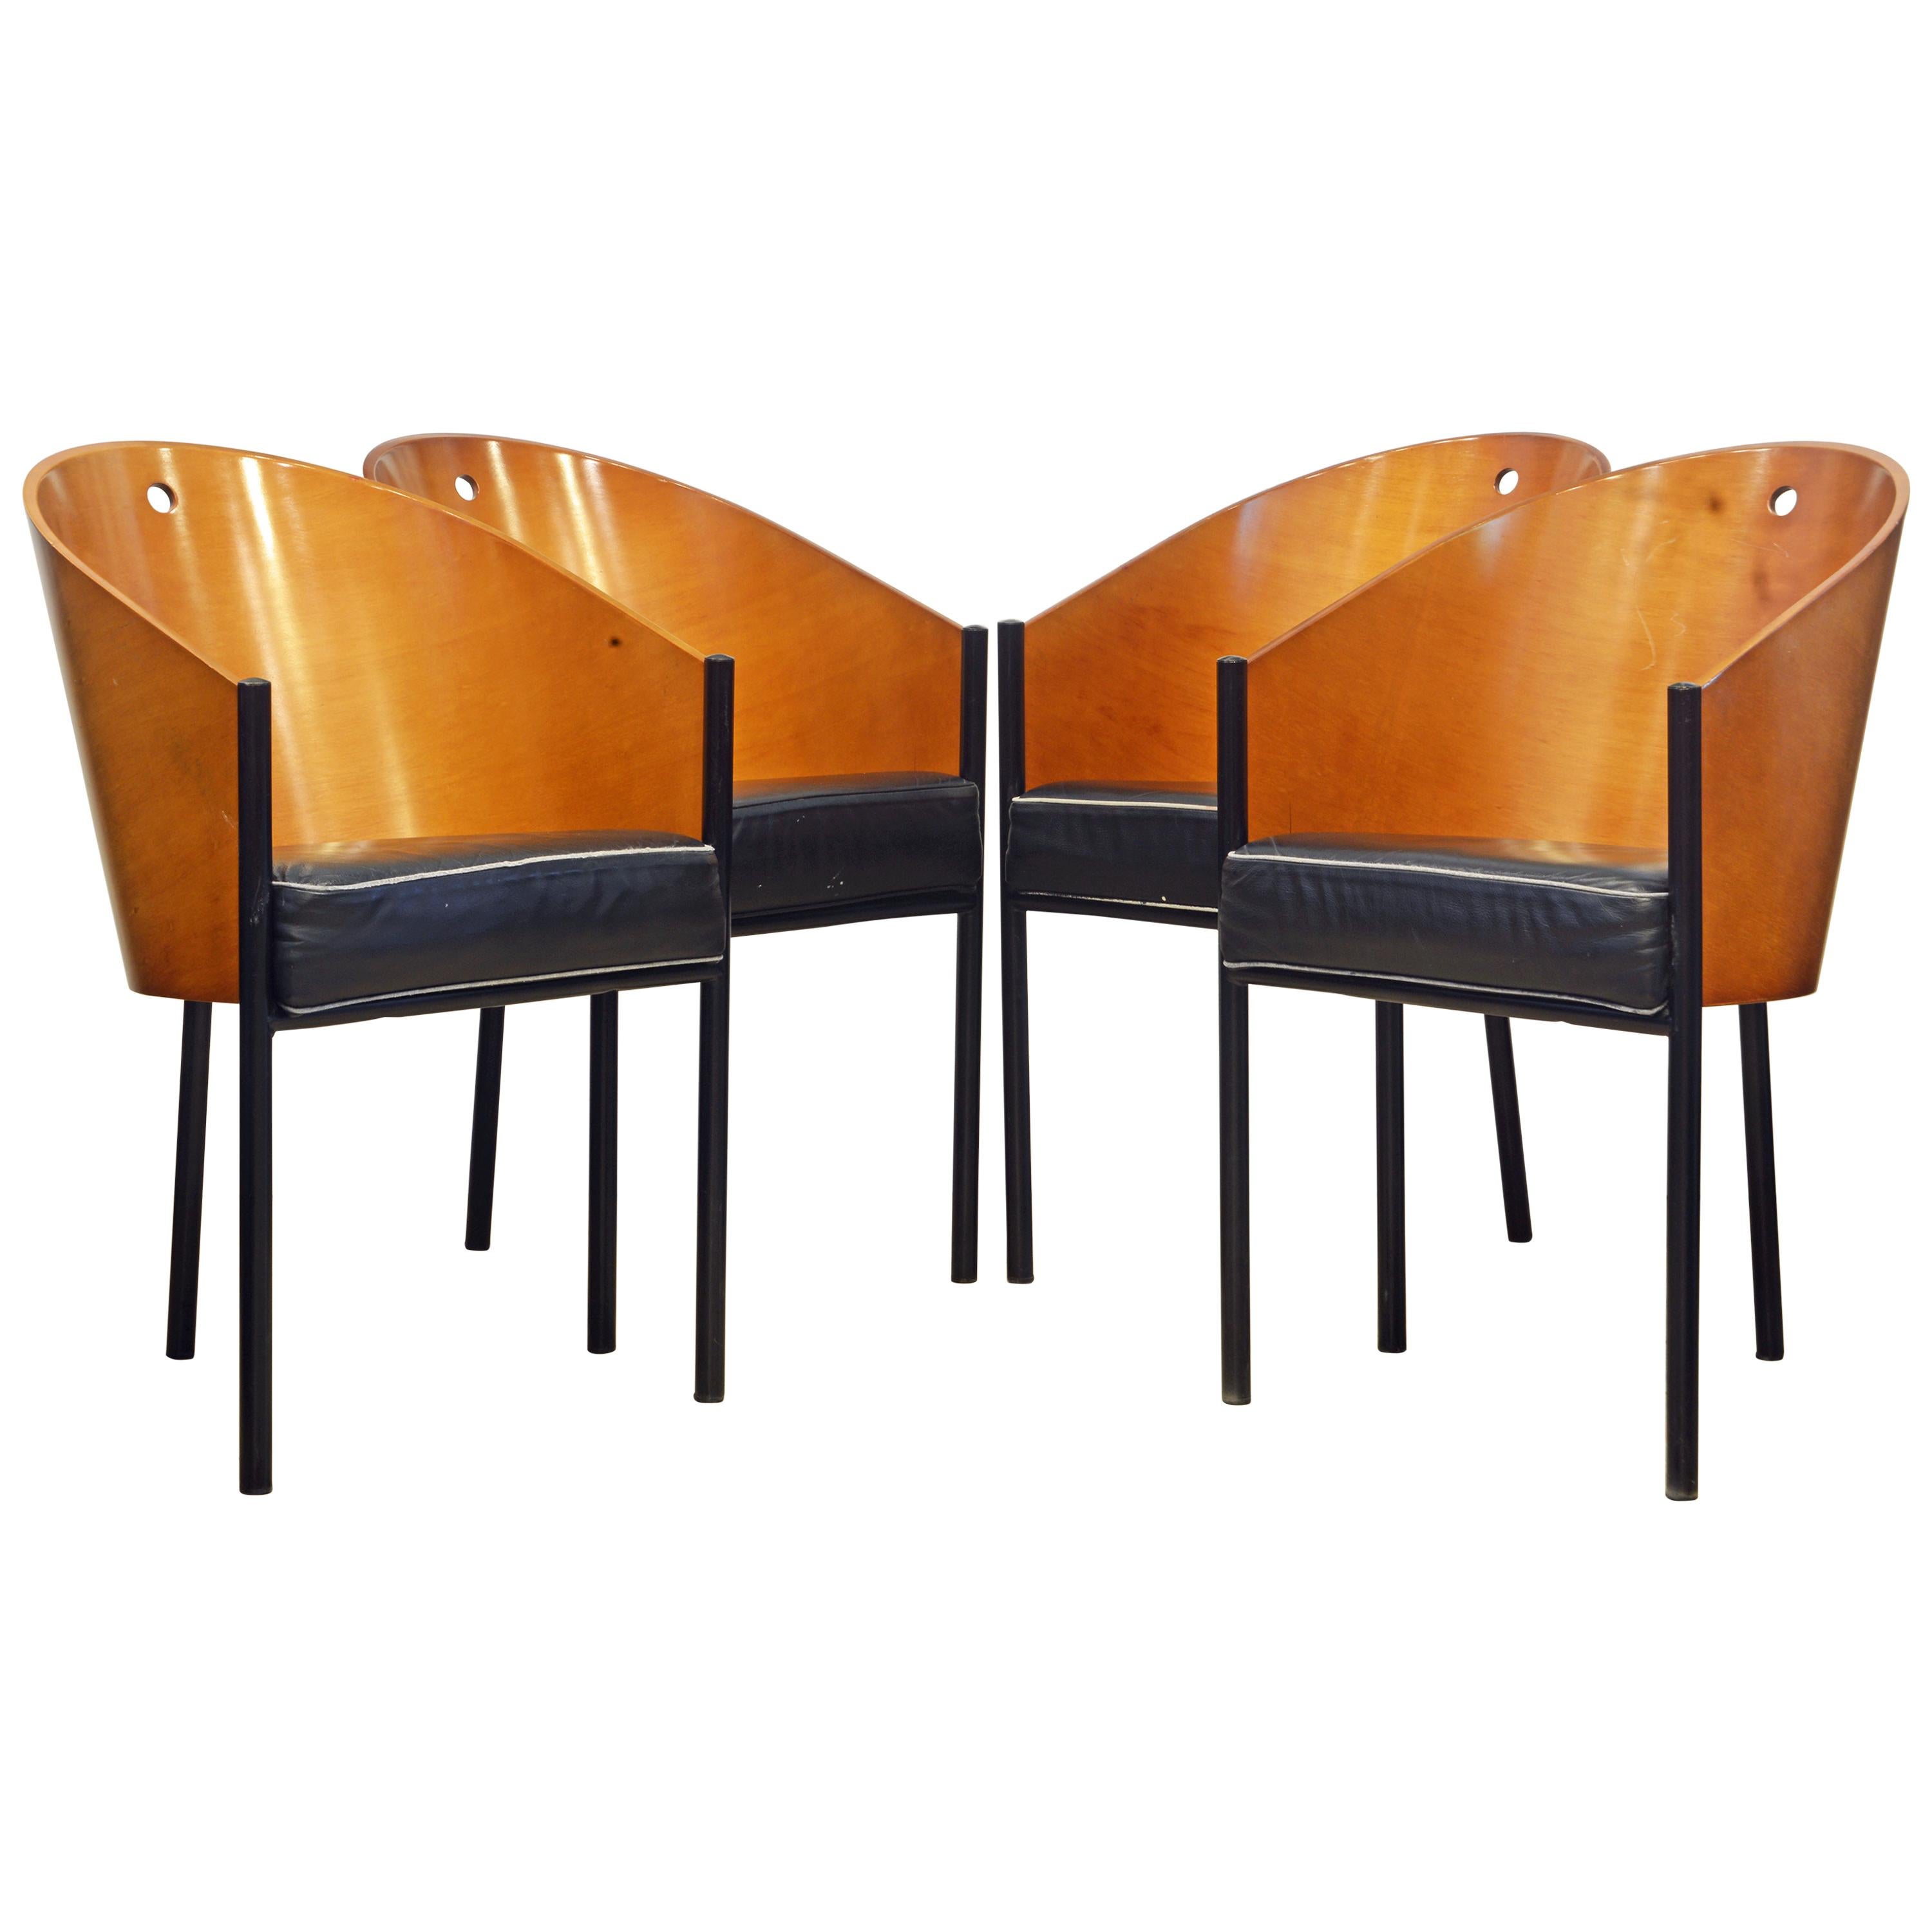 Group of Four Leather Cover Costes Armchairs by Philippe Starck for Driade Italy